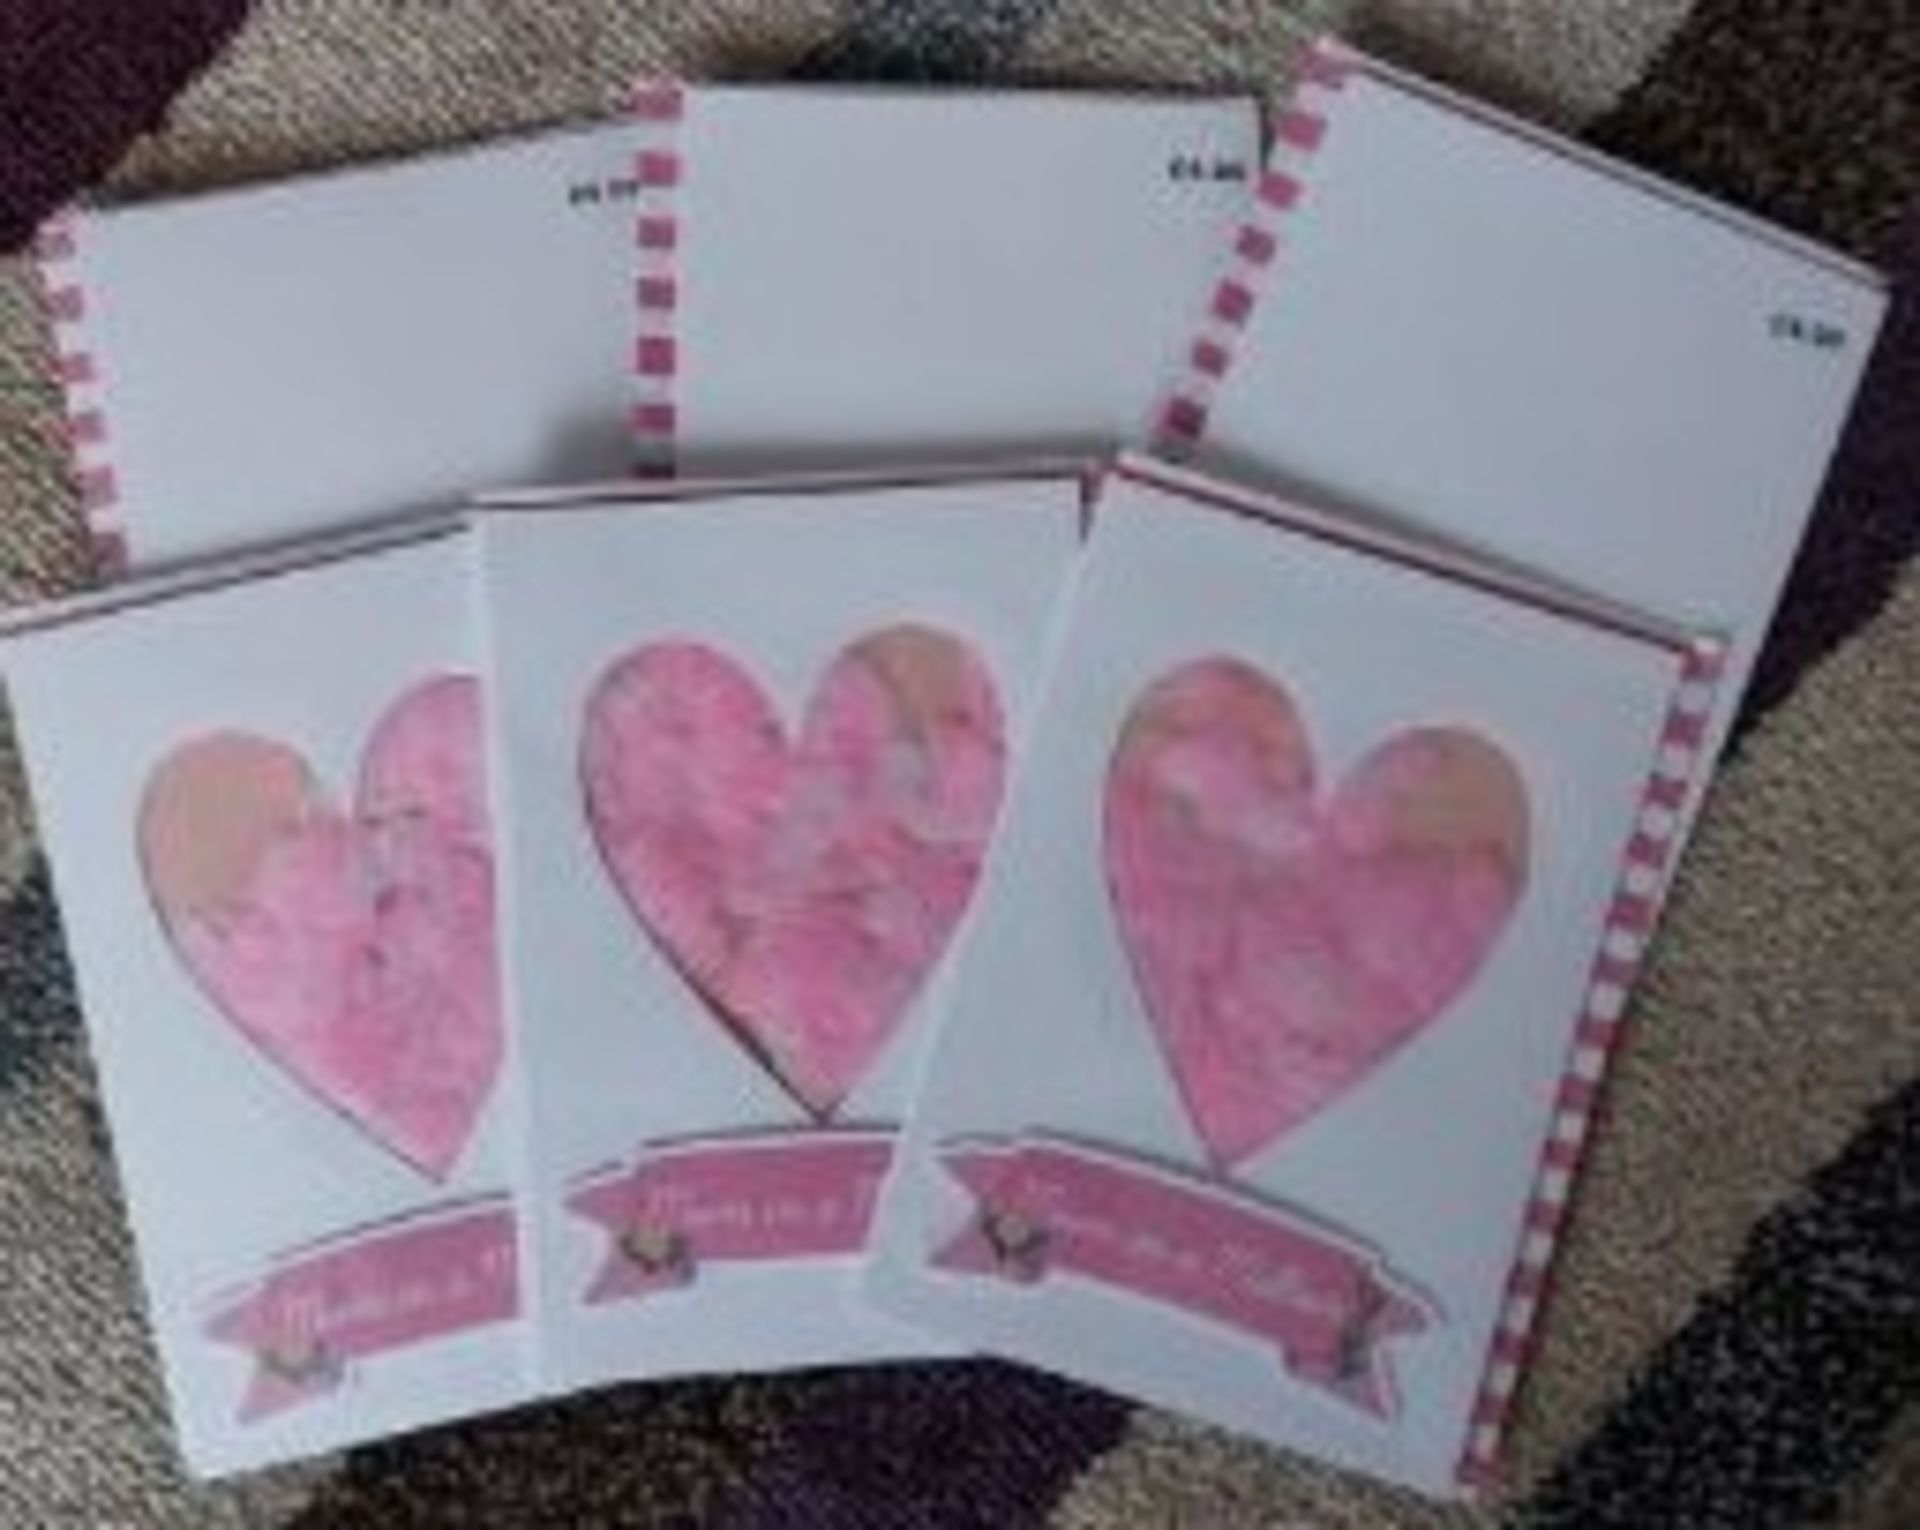 Mum In A Million Cards x 48 (RRP £196) - Image 4 of 4